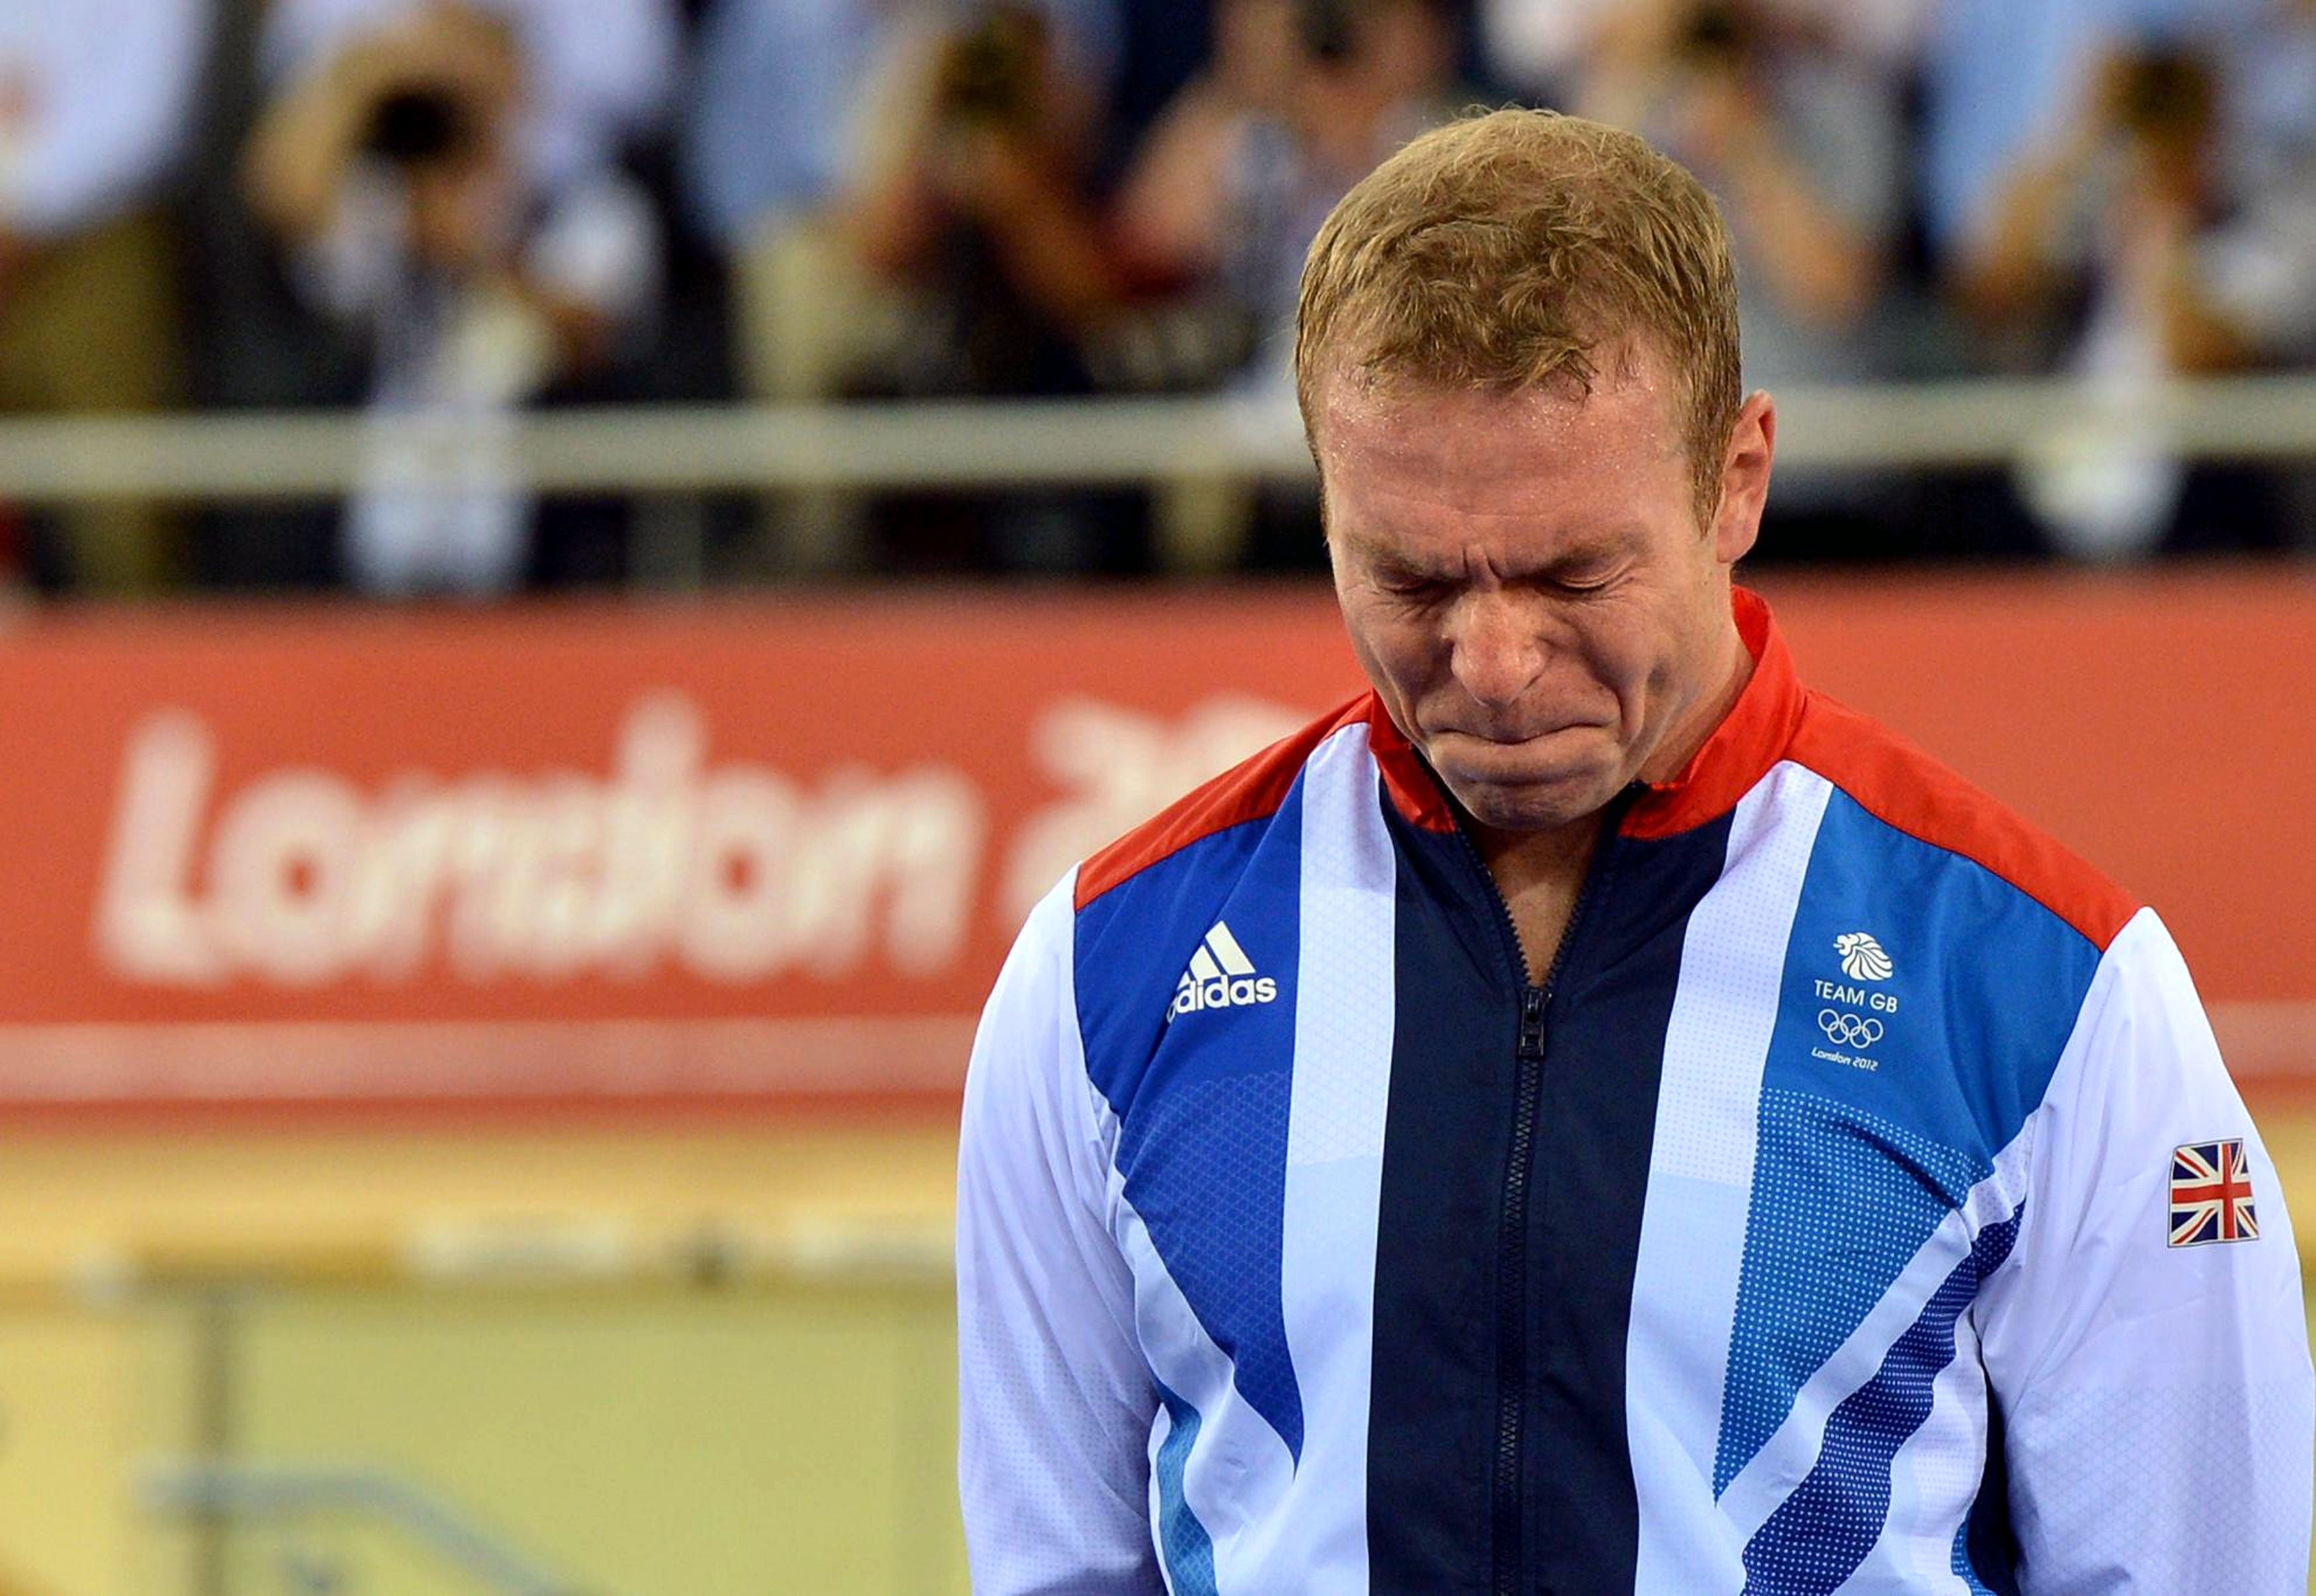 Chris Hoy became emotional after winning gold in the men’s keirin (John Giles/PA)